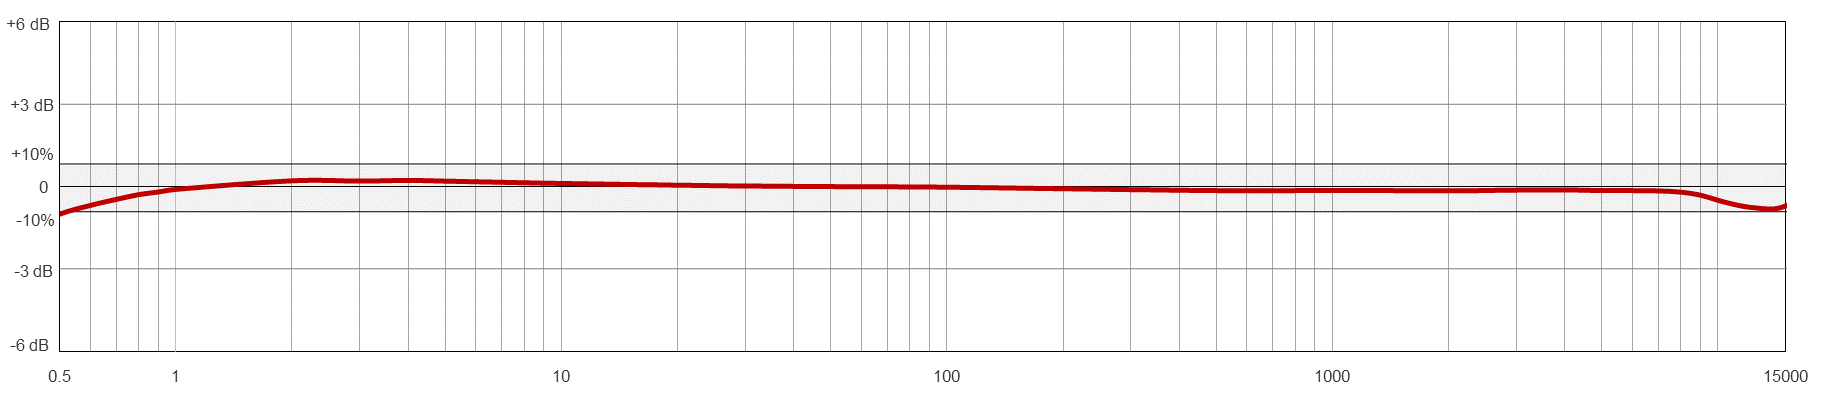 A line graph showing the frequency resopnse of a CTC AC216 condition monitoring sensor.